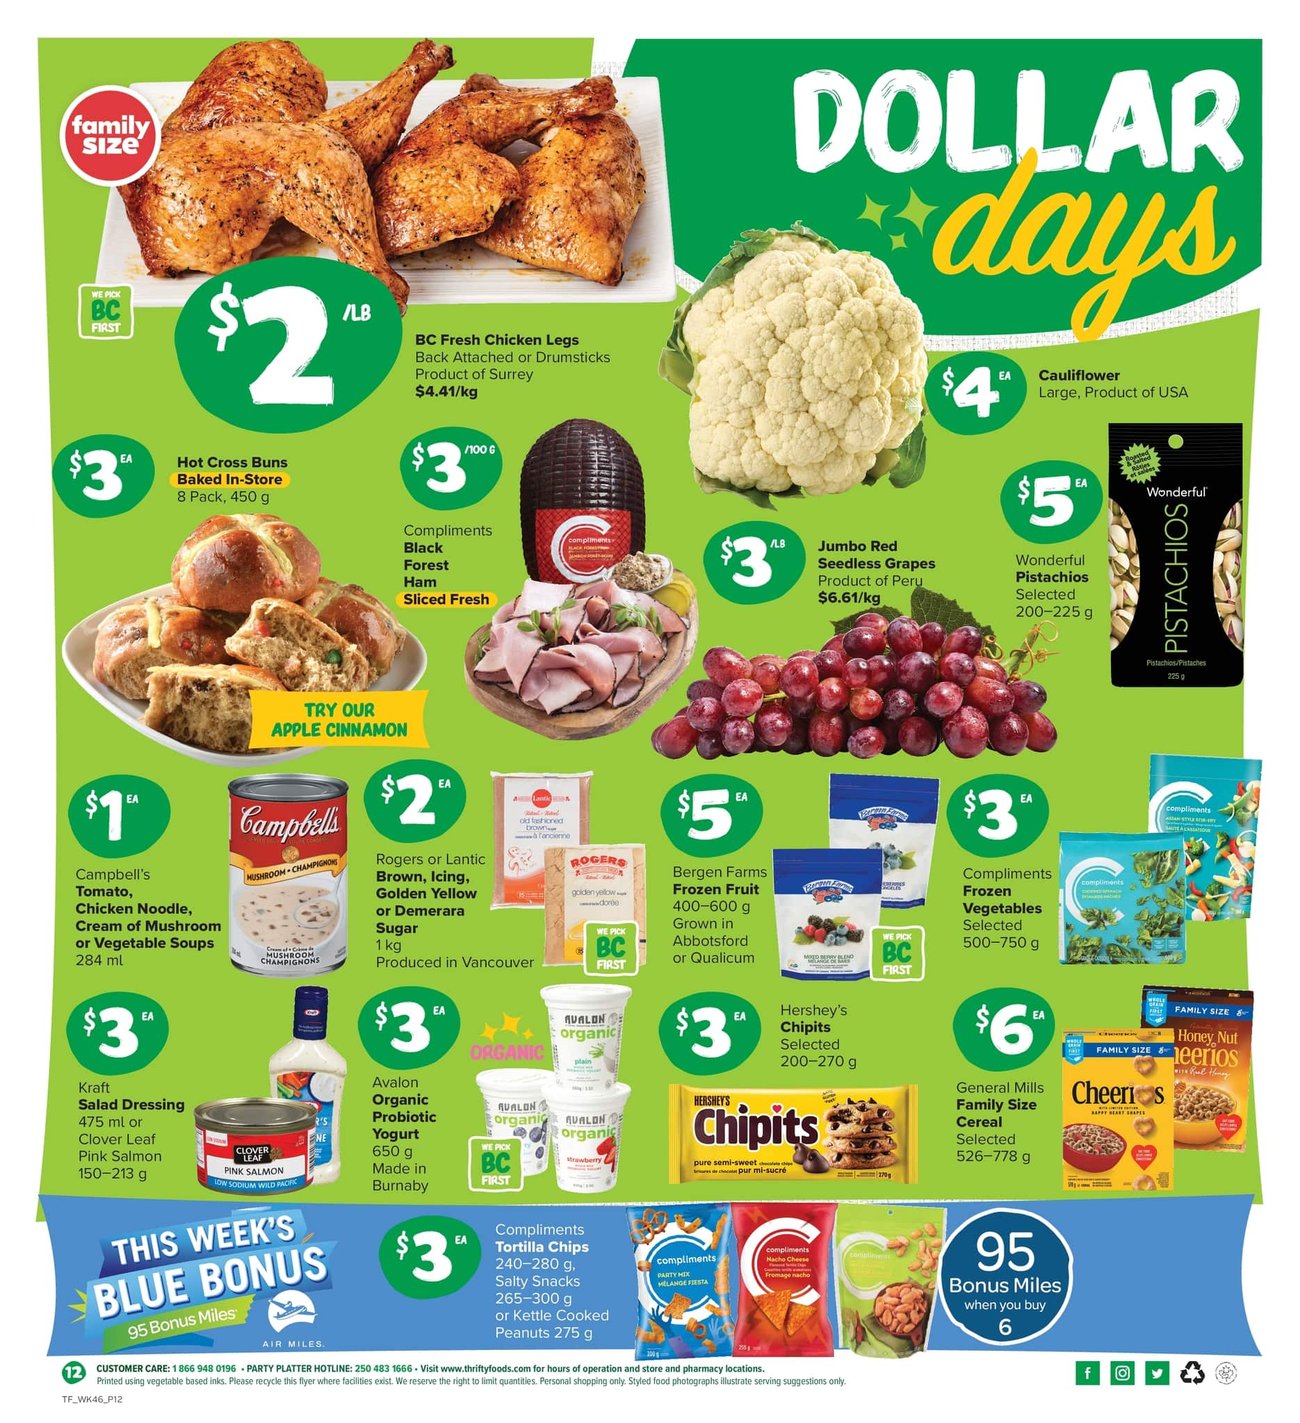 Thrifty Foods - Weekly Flyer Specials - Page 12